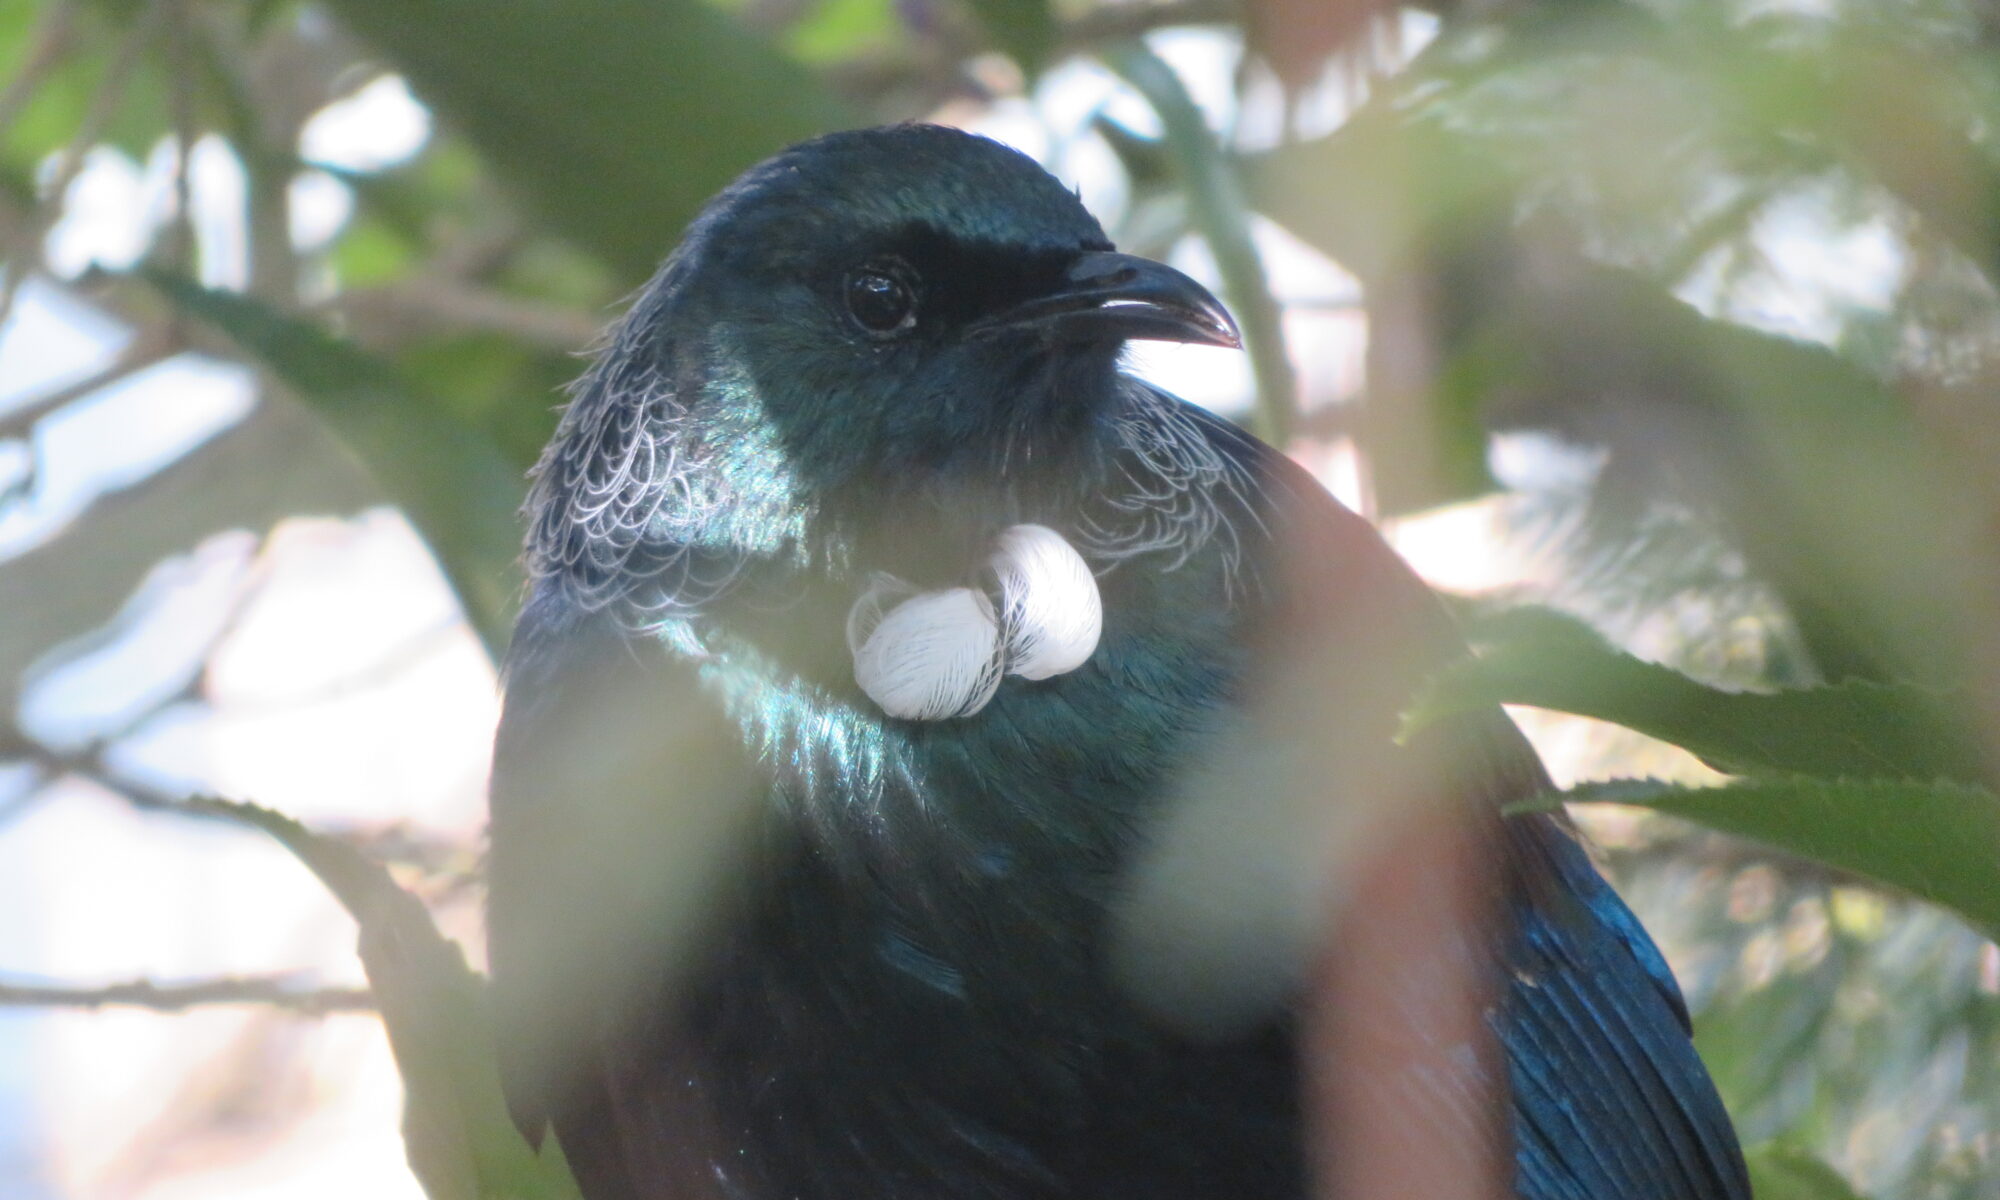 image- Tui resting in mahoe tree after drinking from water dish in a small garden